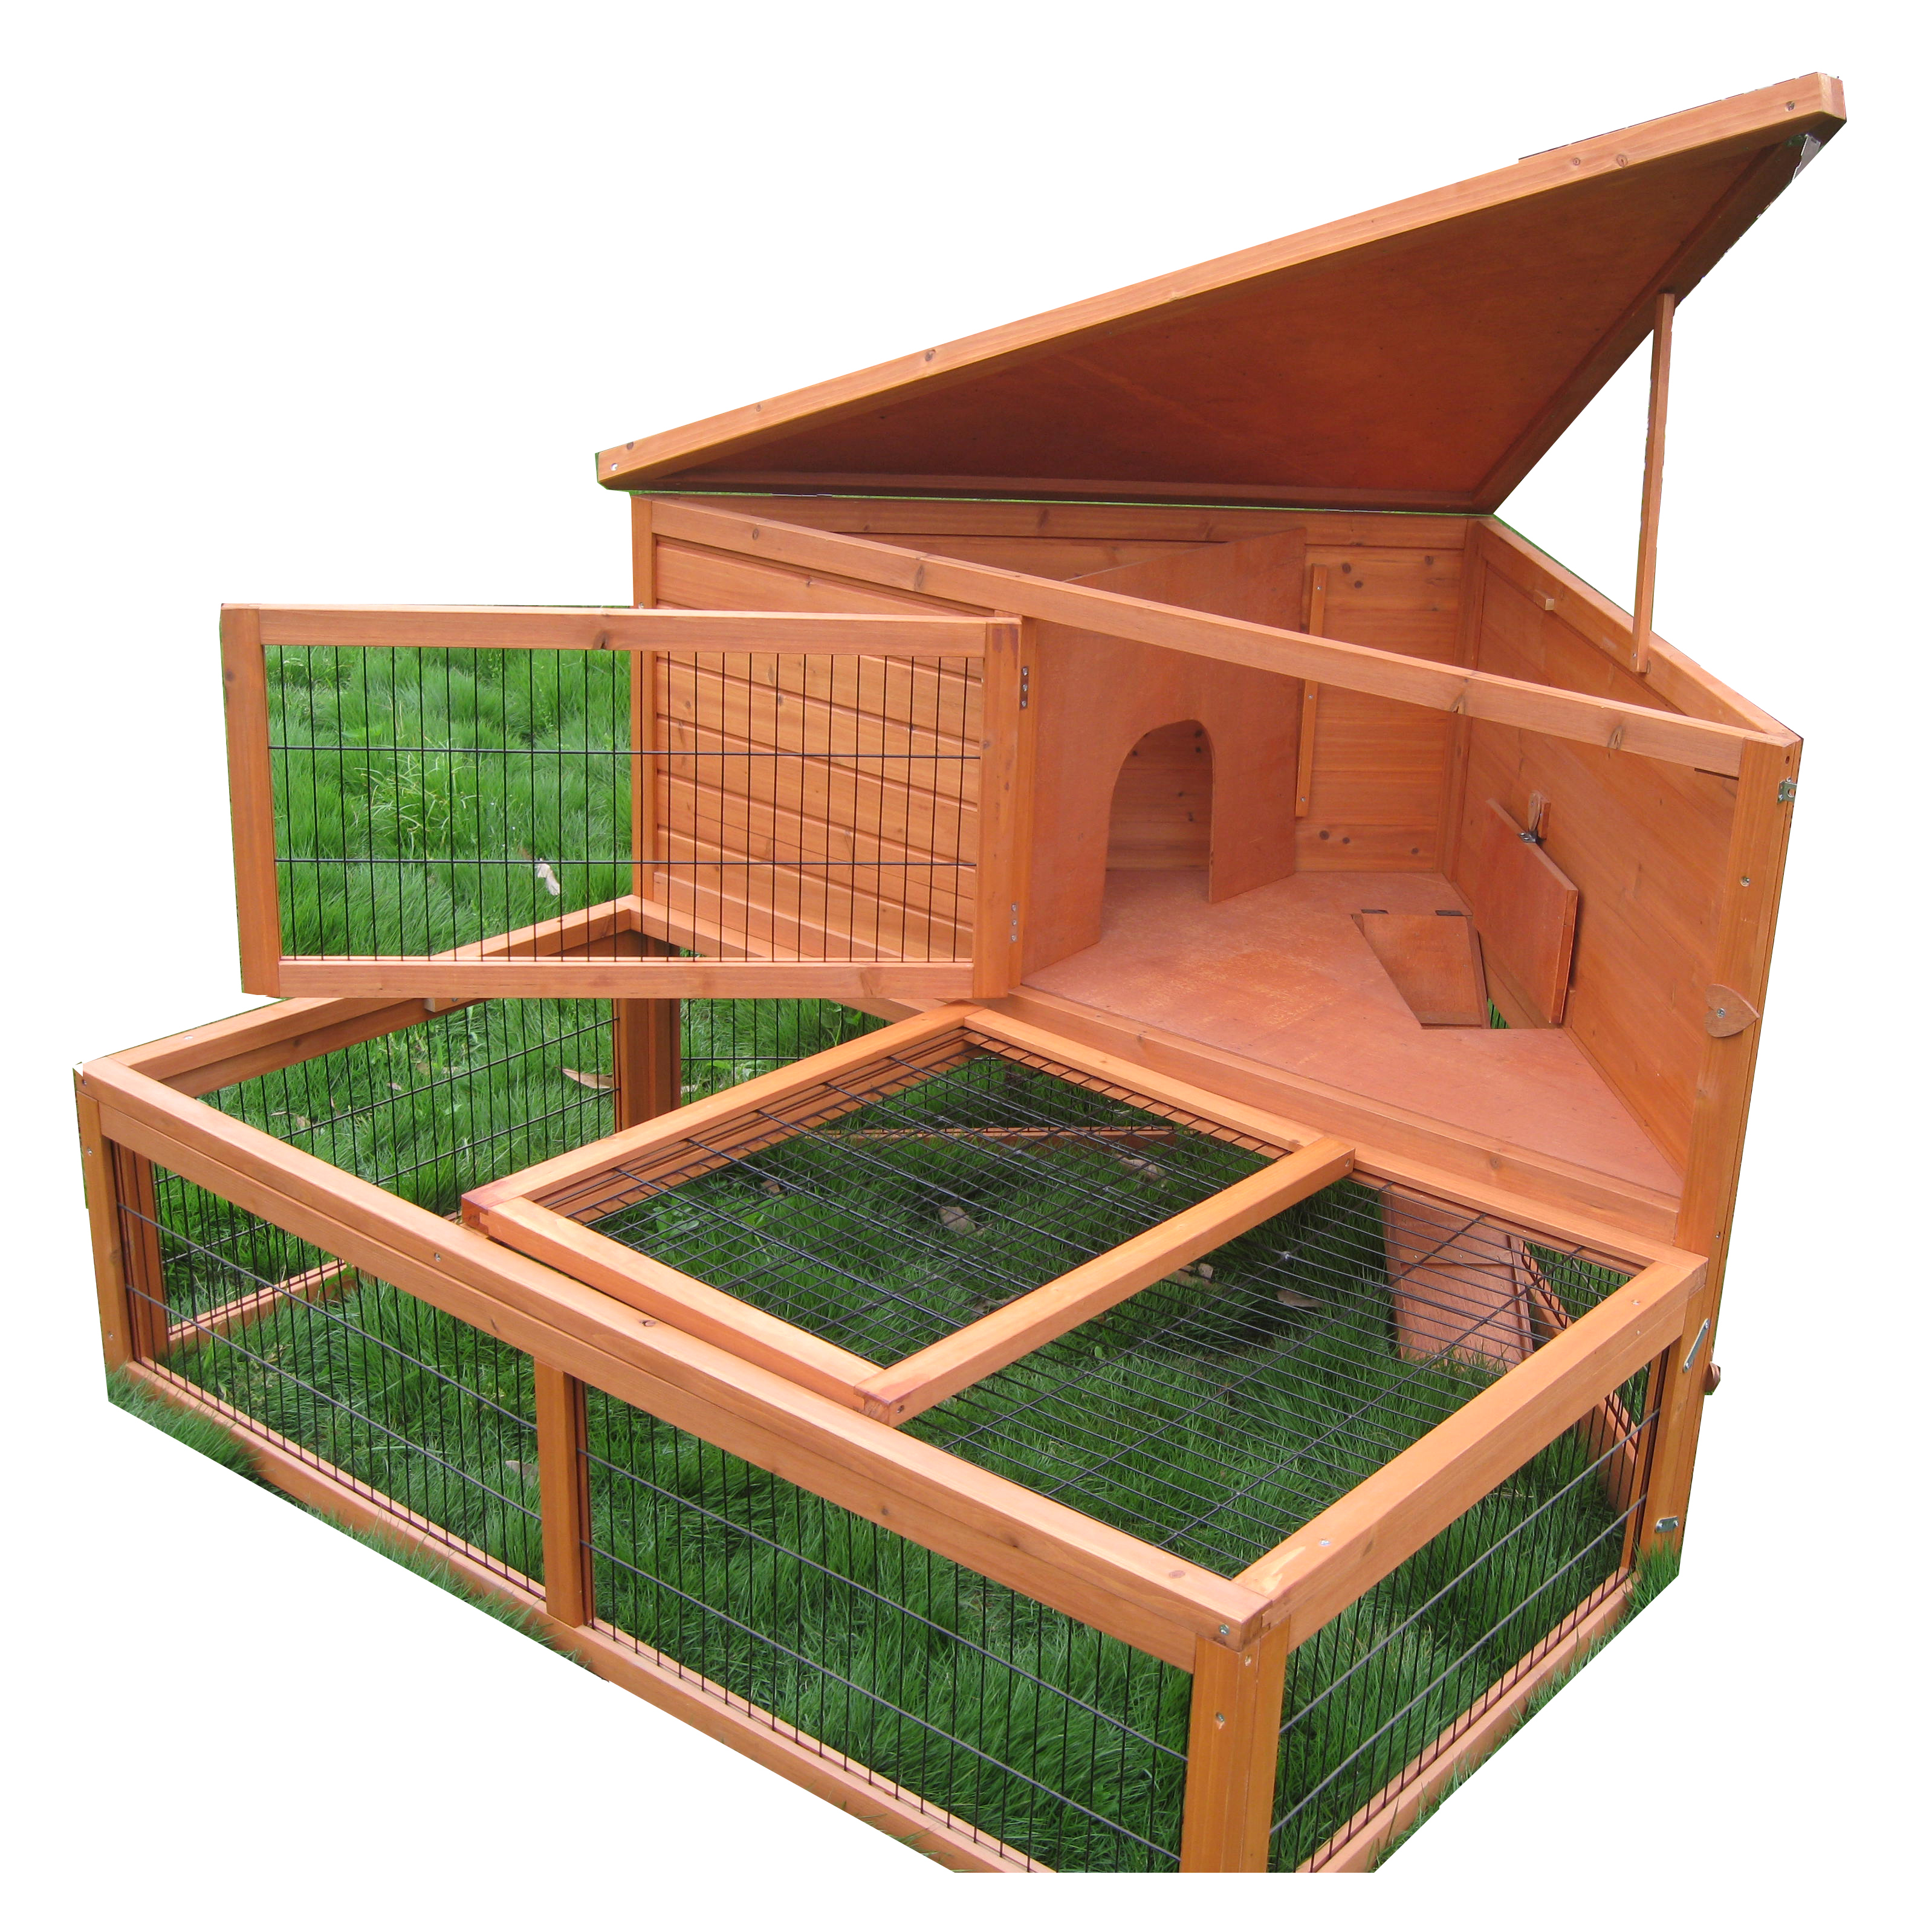 OEM China Best Puppy Training Pads -
 Factory custom Hideaway Guinea Pig Small Animal Fun Xxl Cage pet Rodent Wood 2 Floor Wooden Rabbit Hutch – Easy